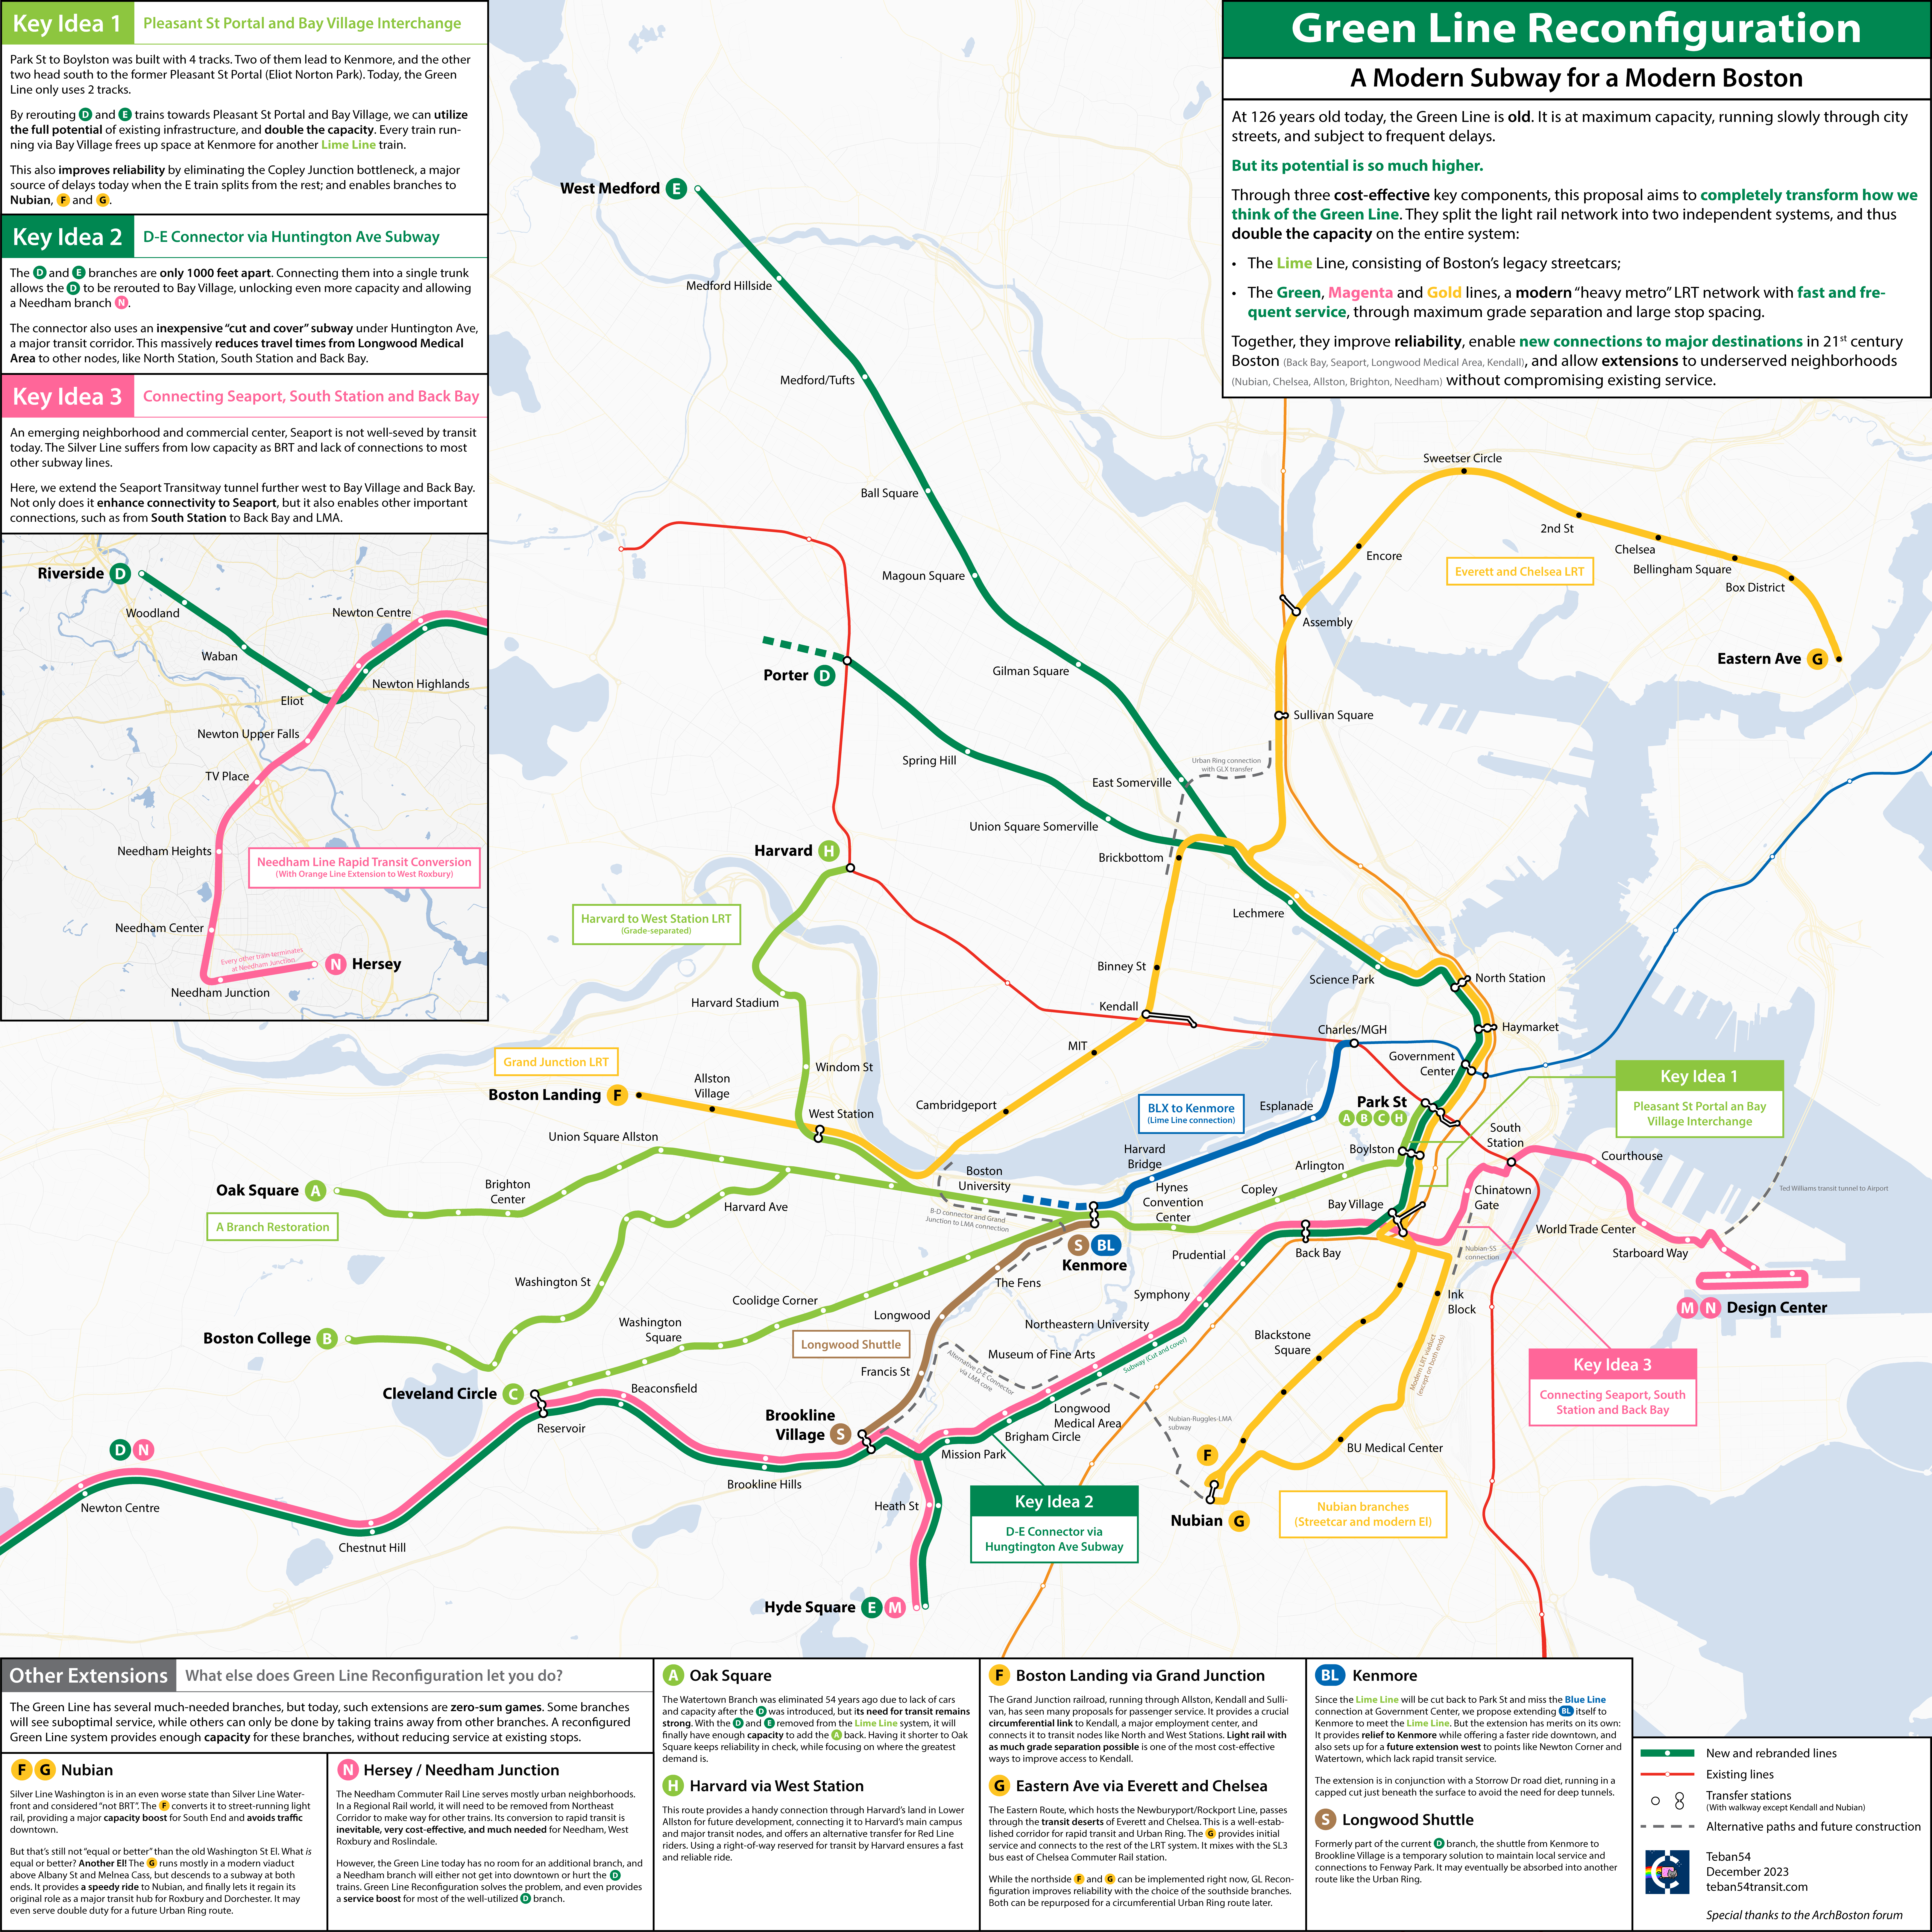 Charles' map of Green Line reconfiguration.